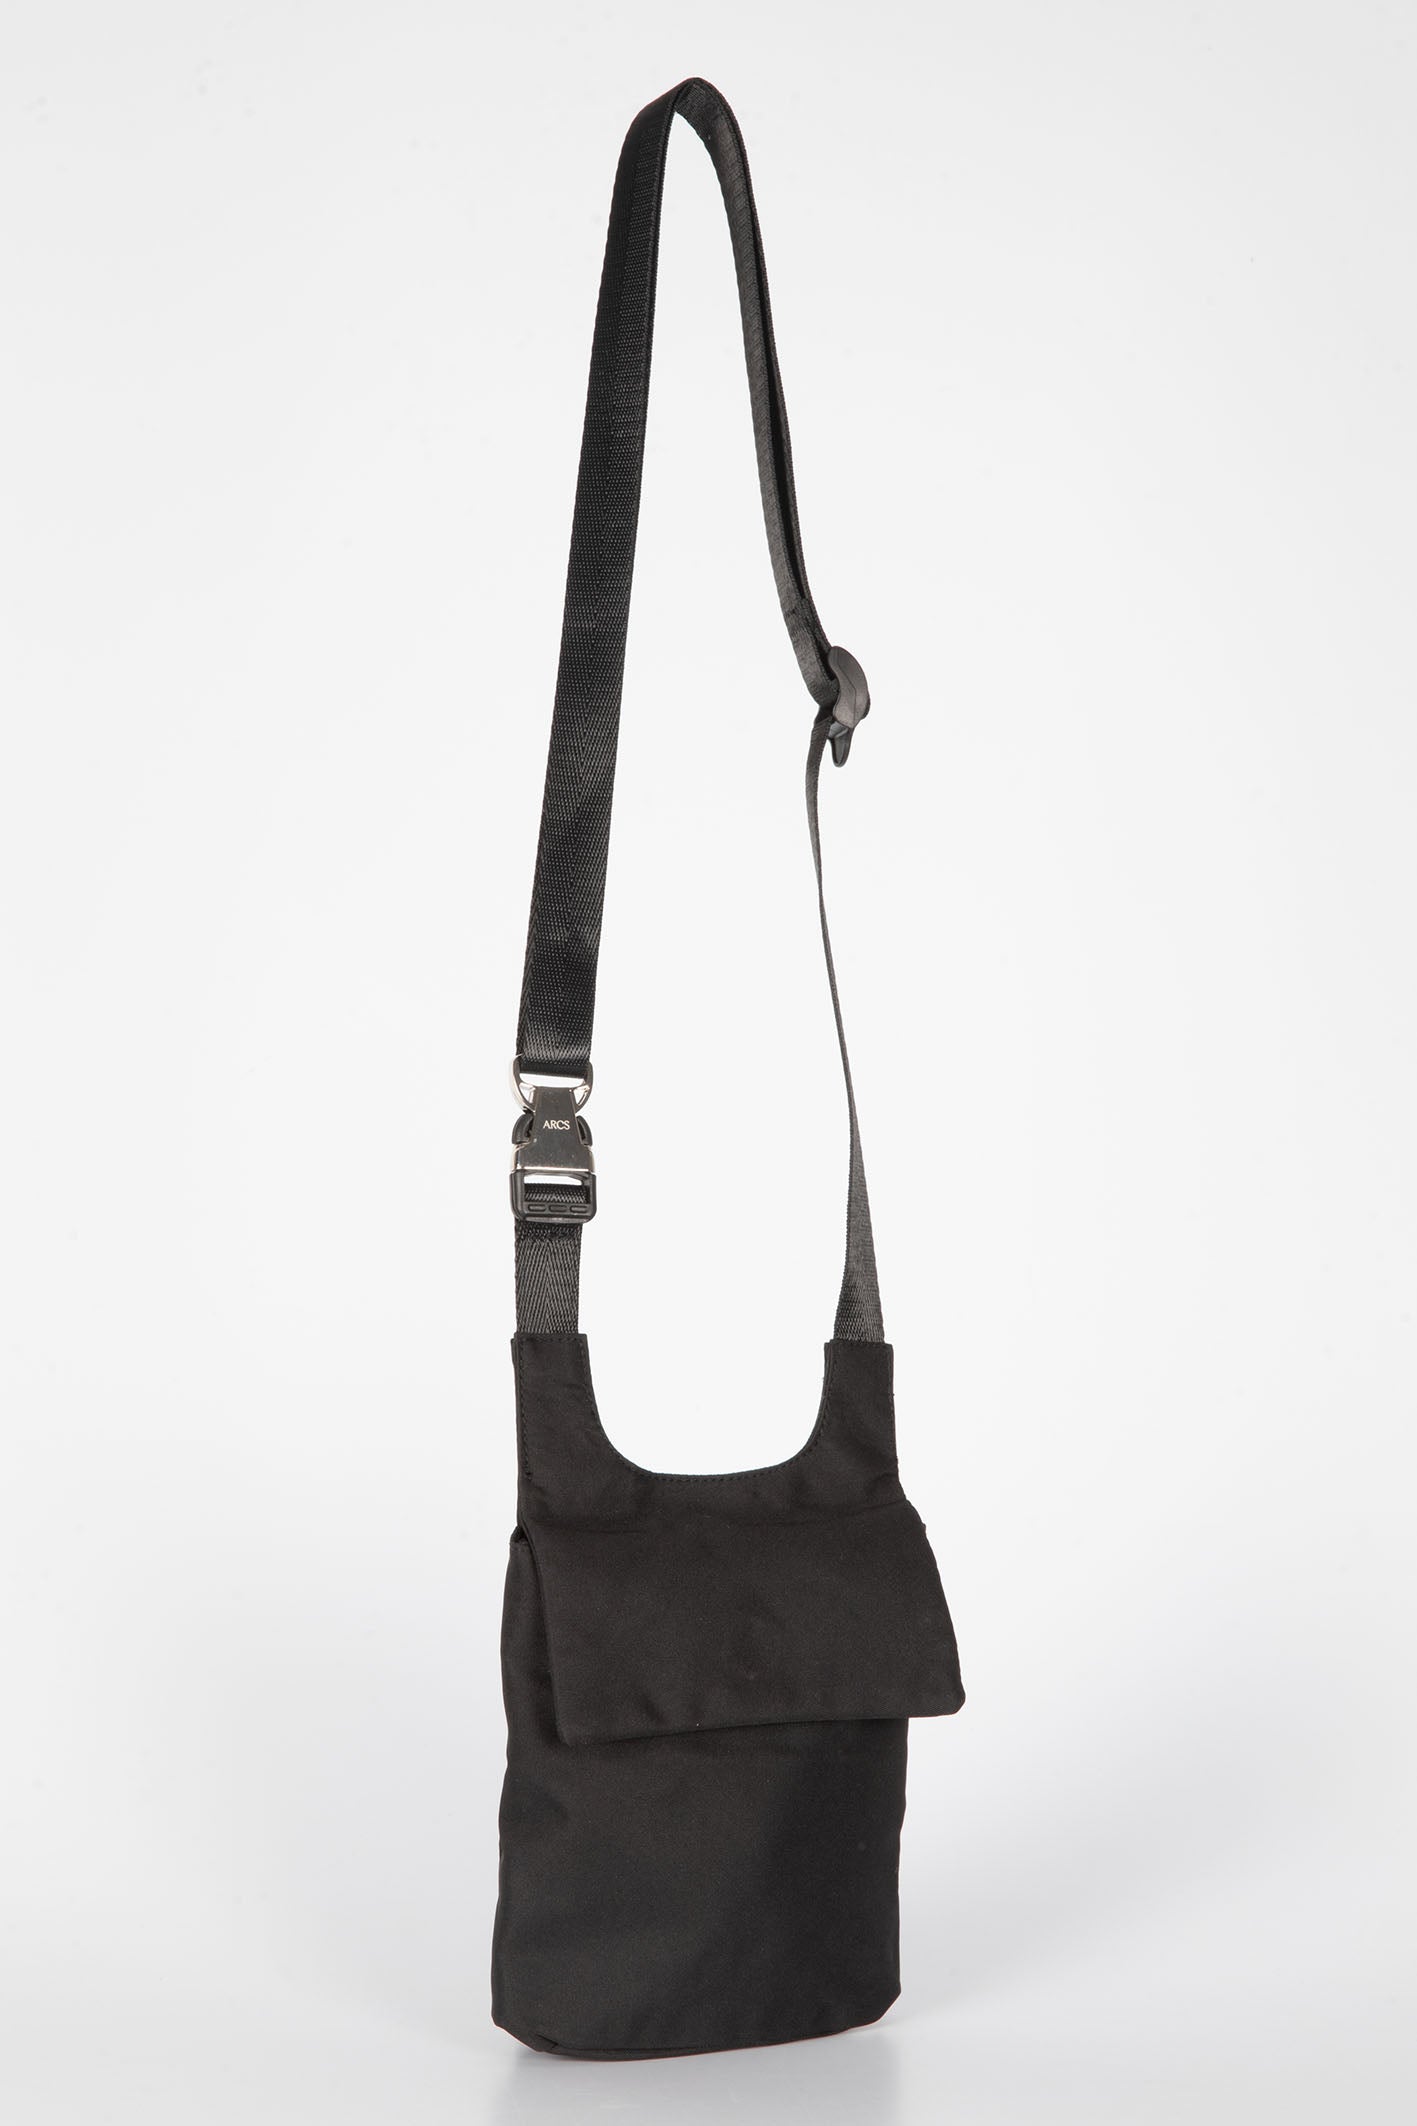 GHOSTING POUCH in BLACK – ARCS London